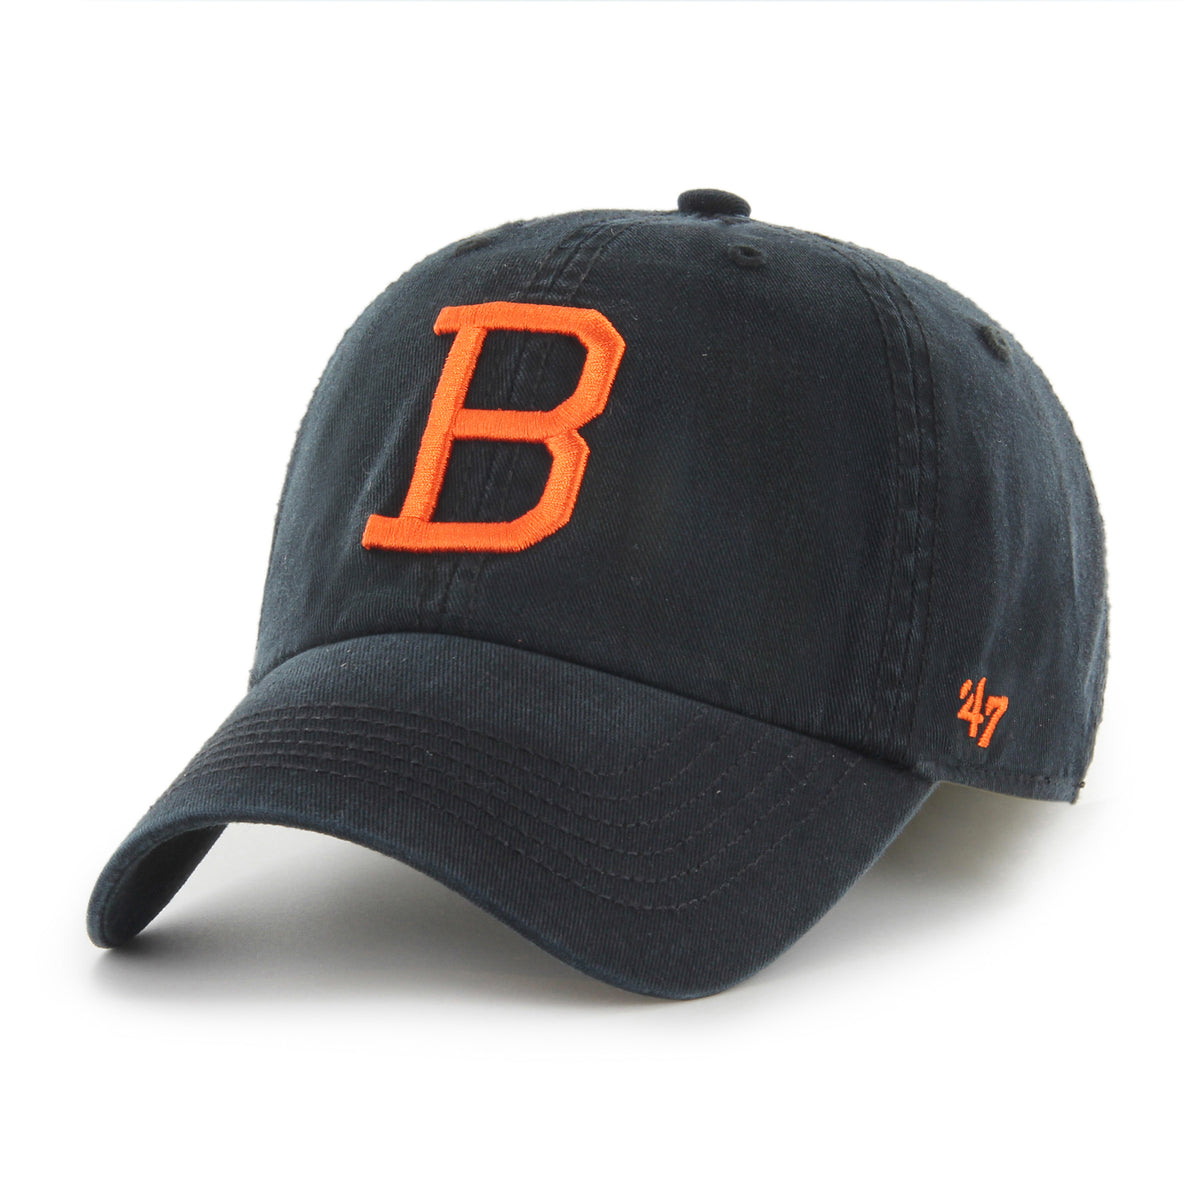 BALTIMORE ORIOLES COOPERSTOWN CLASSIC '47 FRANCHISE